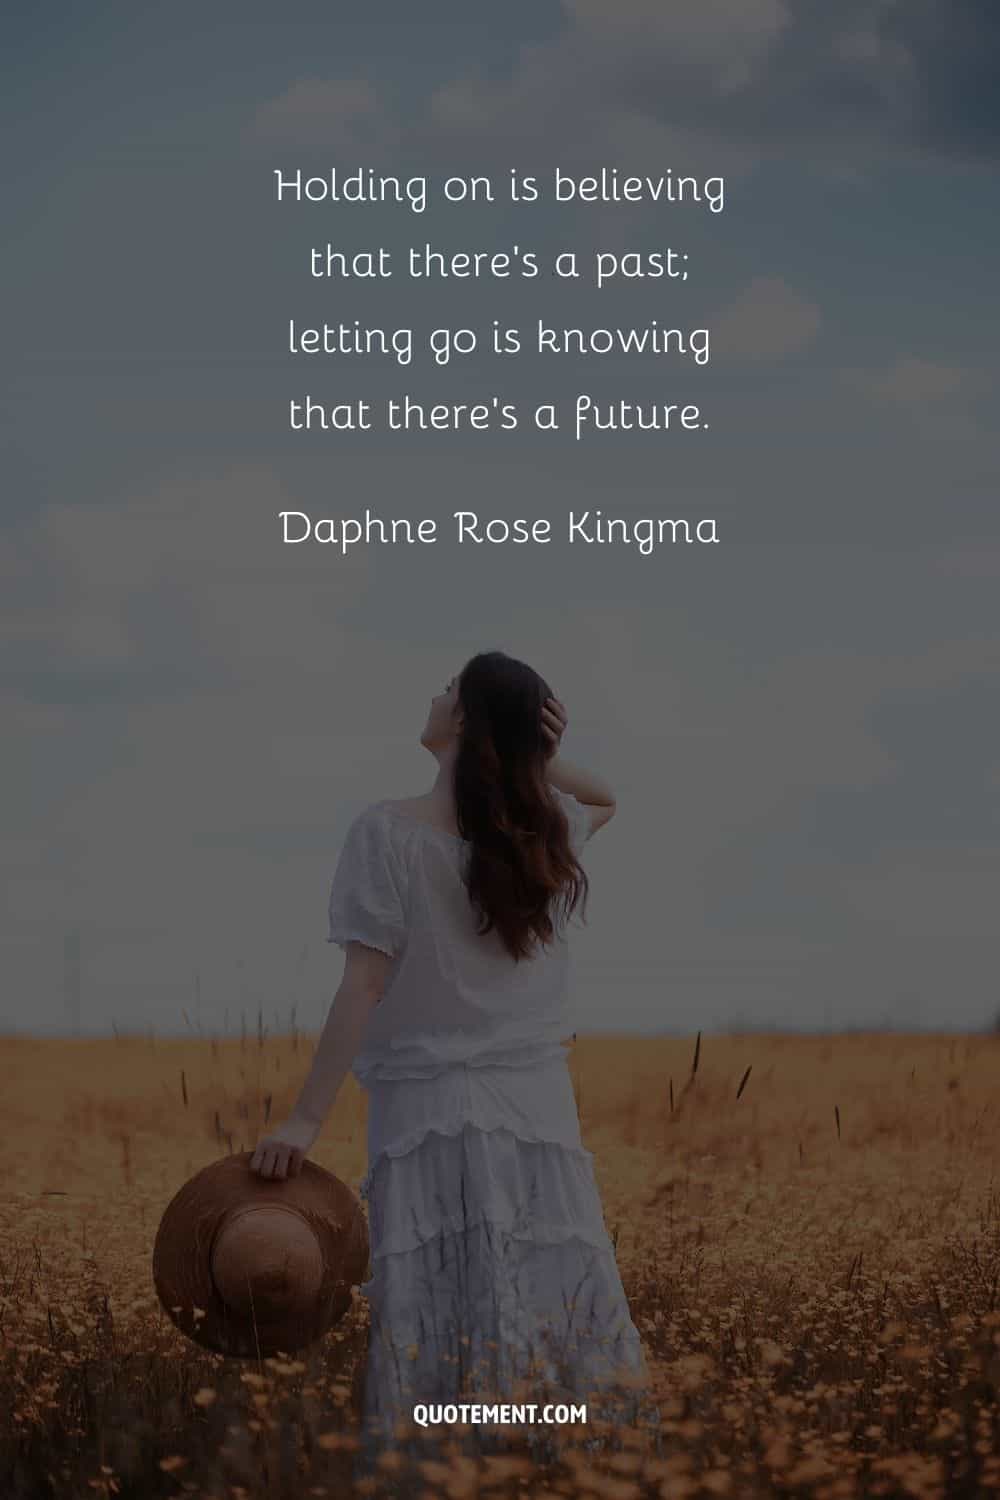 “Holding on is believing that there’s a past; letting go is knowing that there’s a future.” — Daphne Rose Kingma